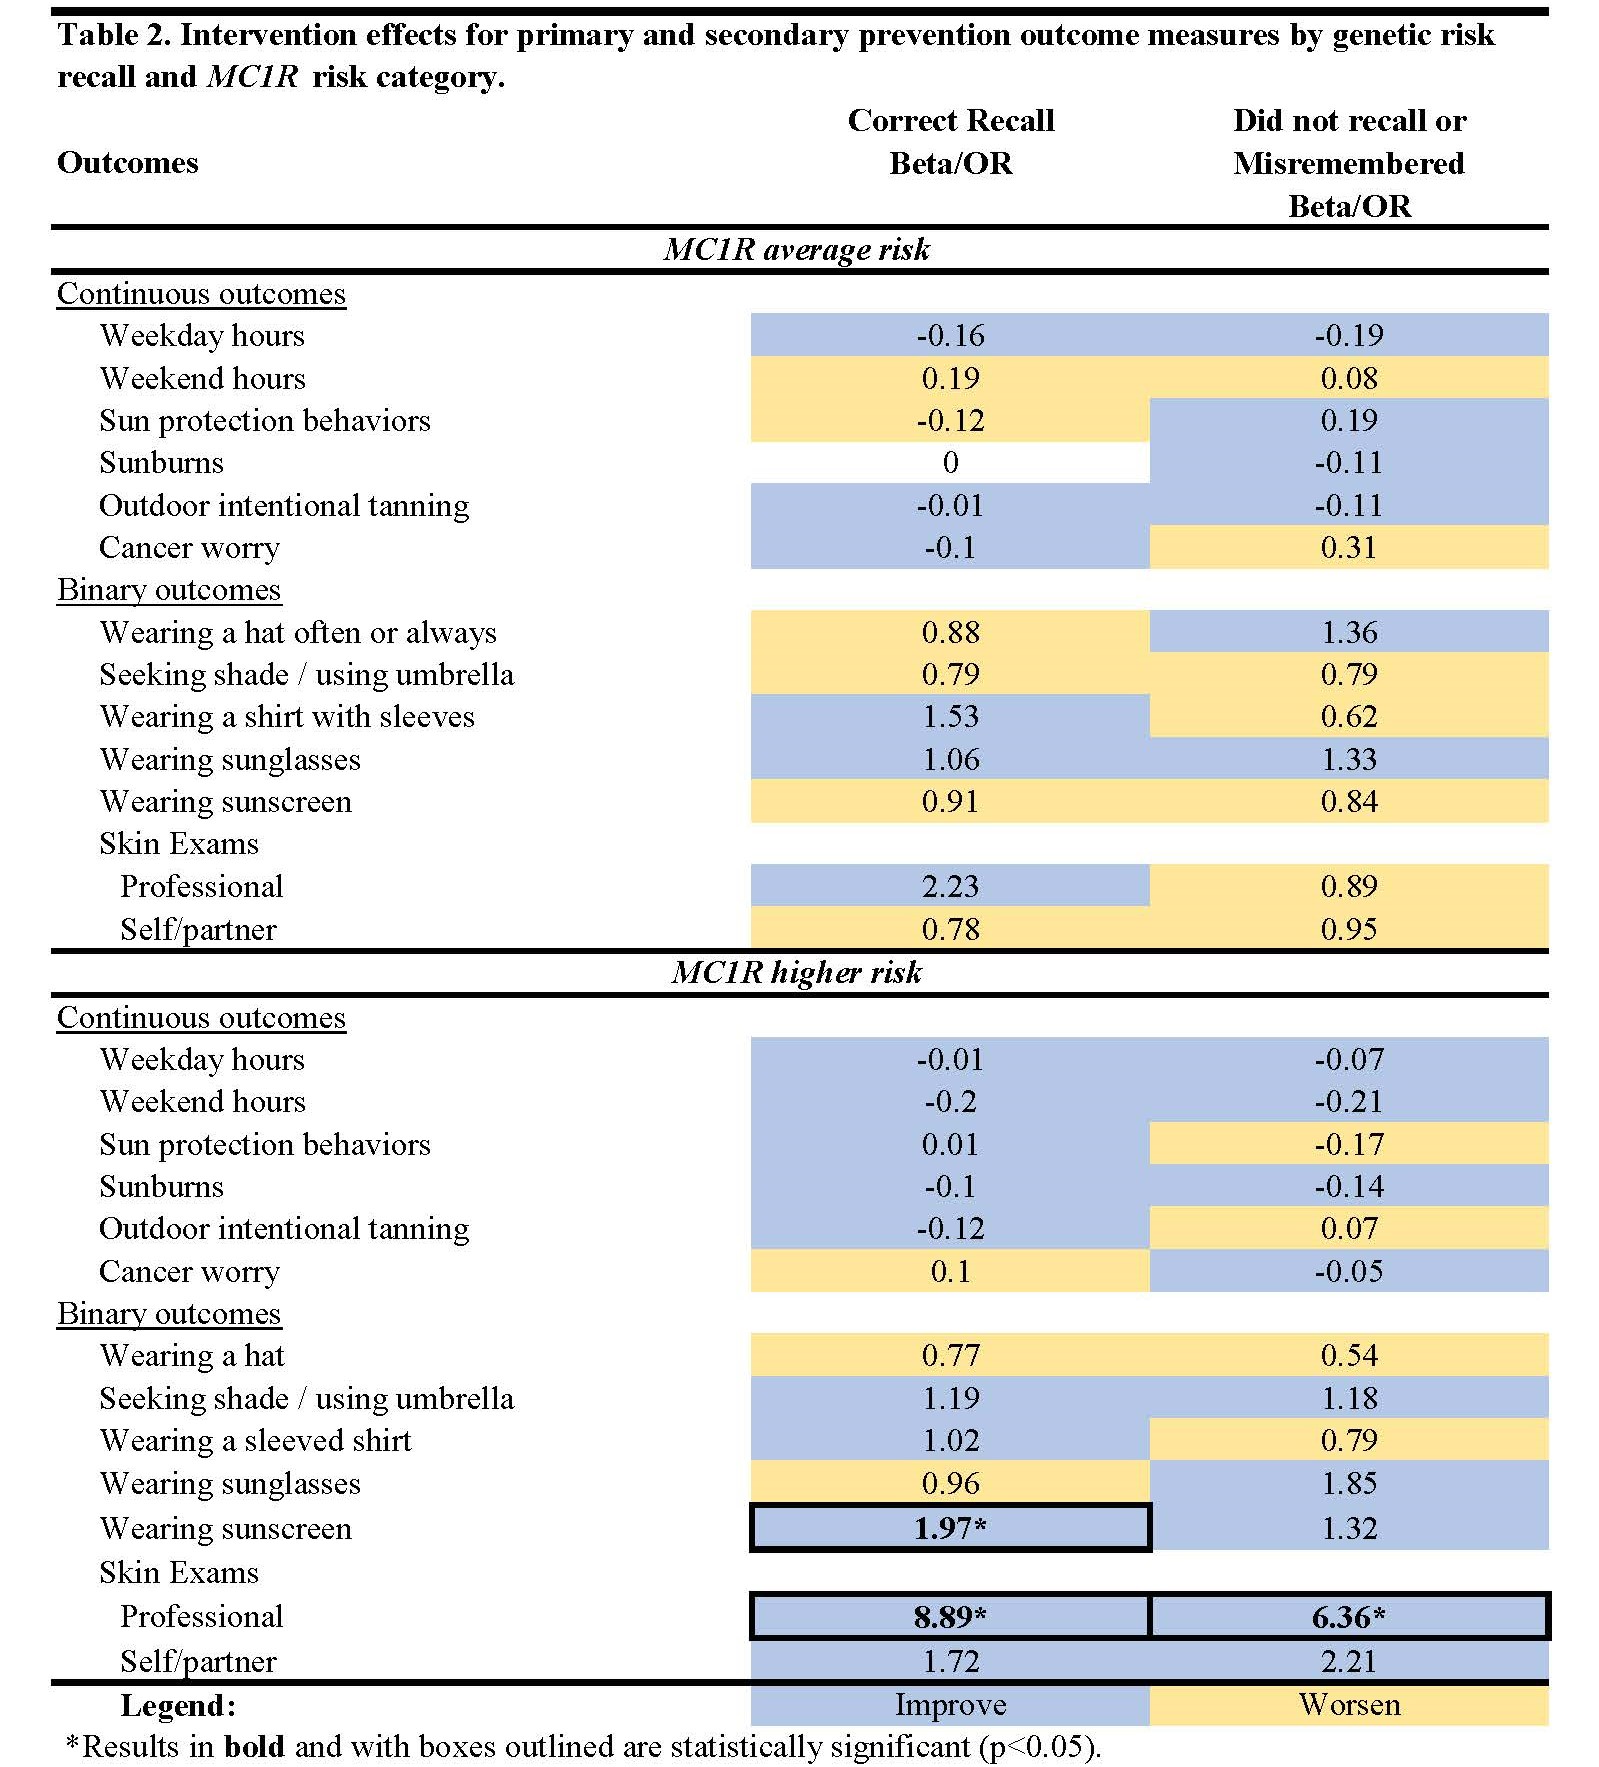 Table showing intervention effects for primary and secondary prevention outcome measures by genetic risk recall and MC1R risk category